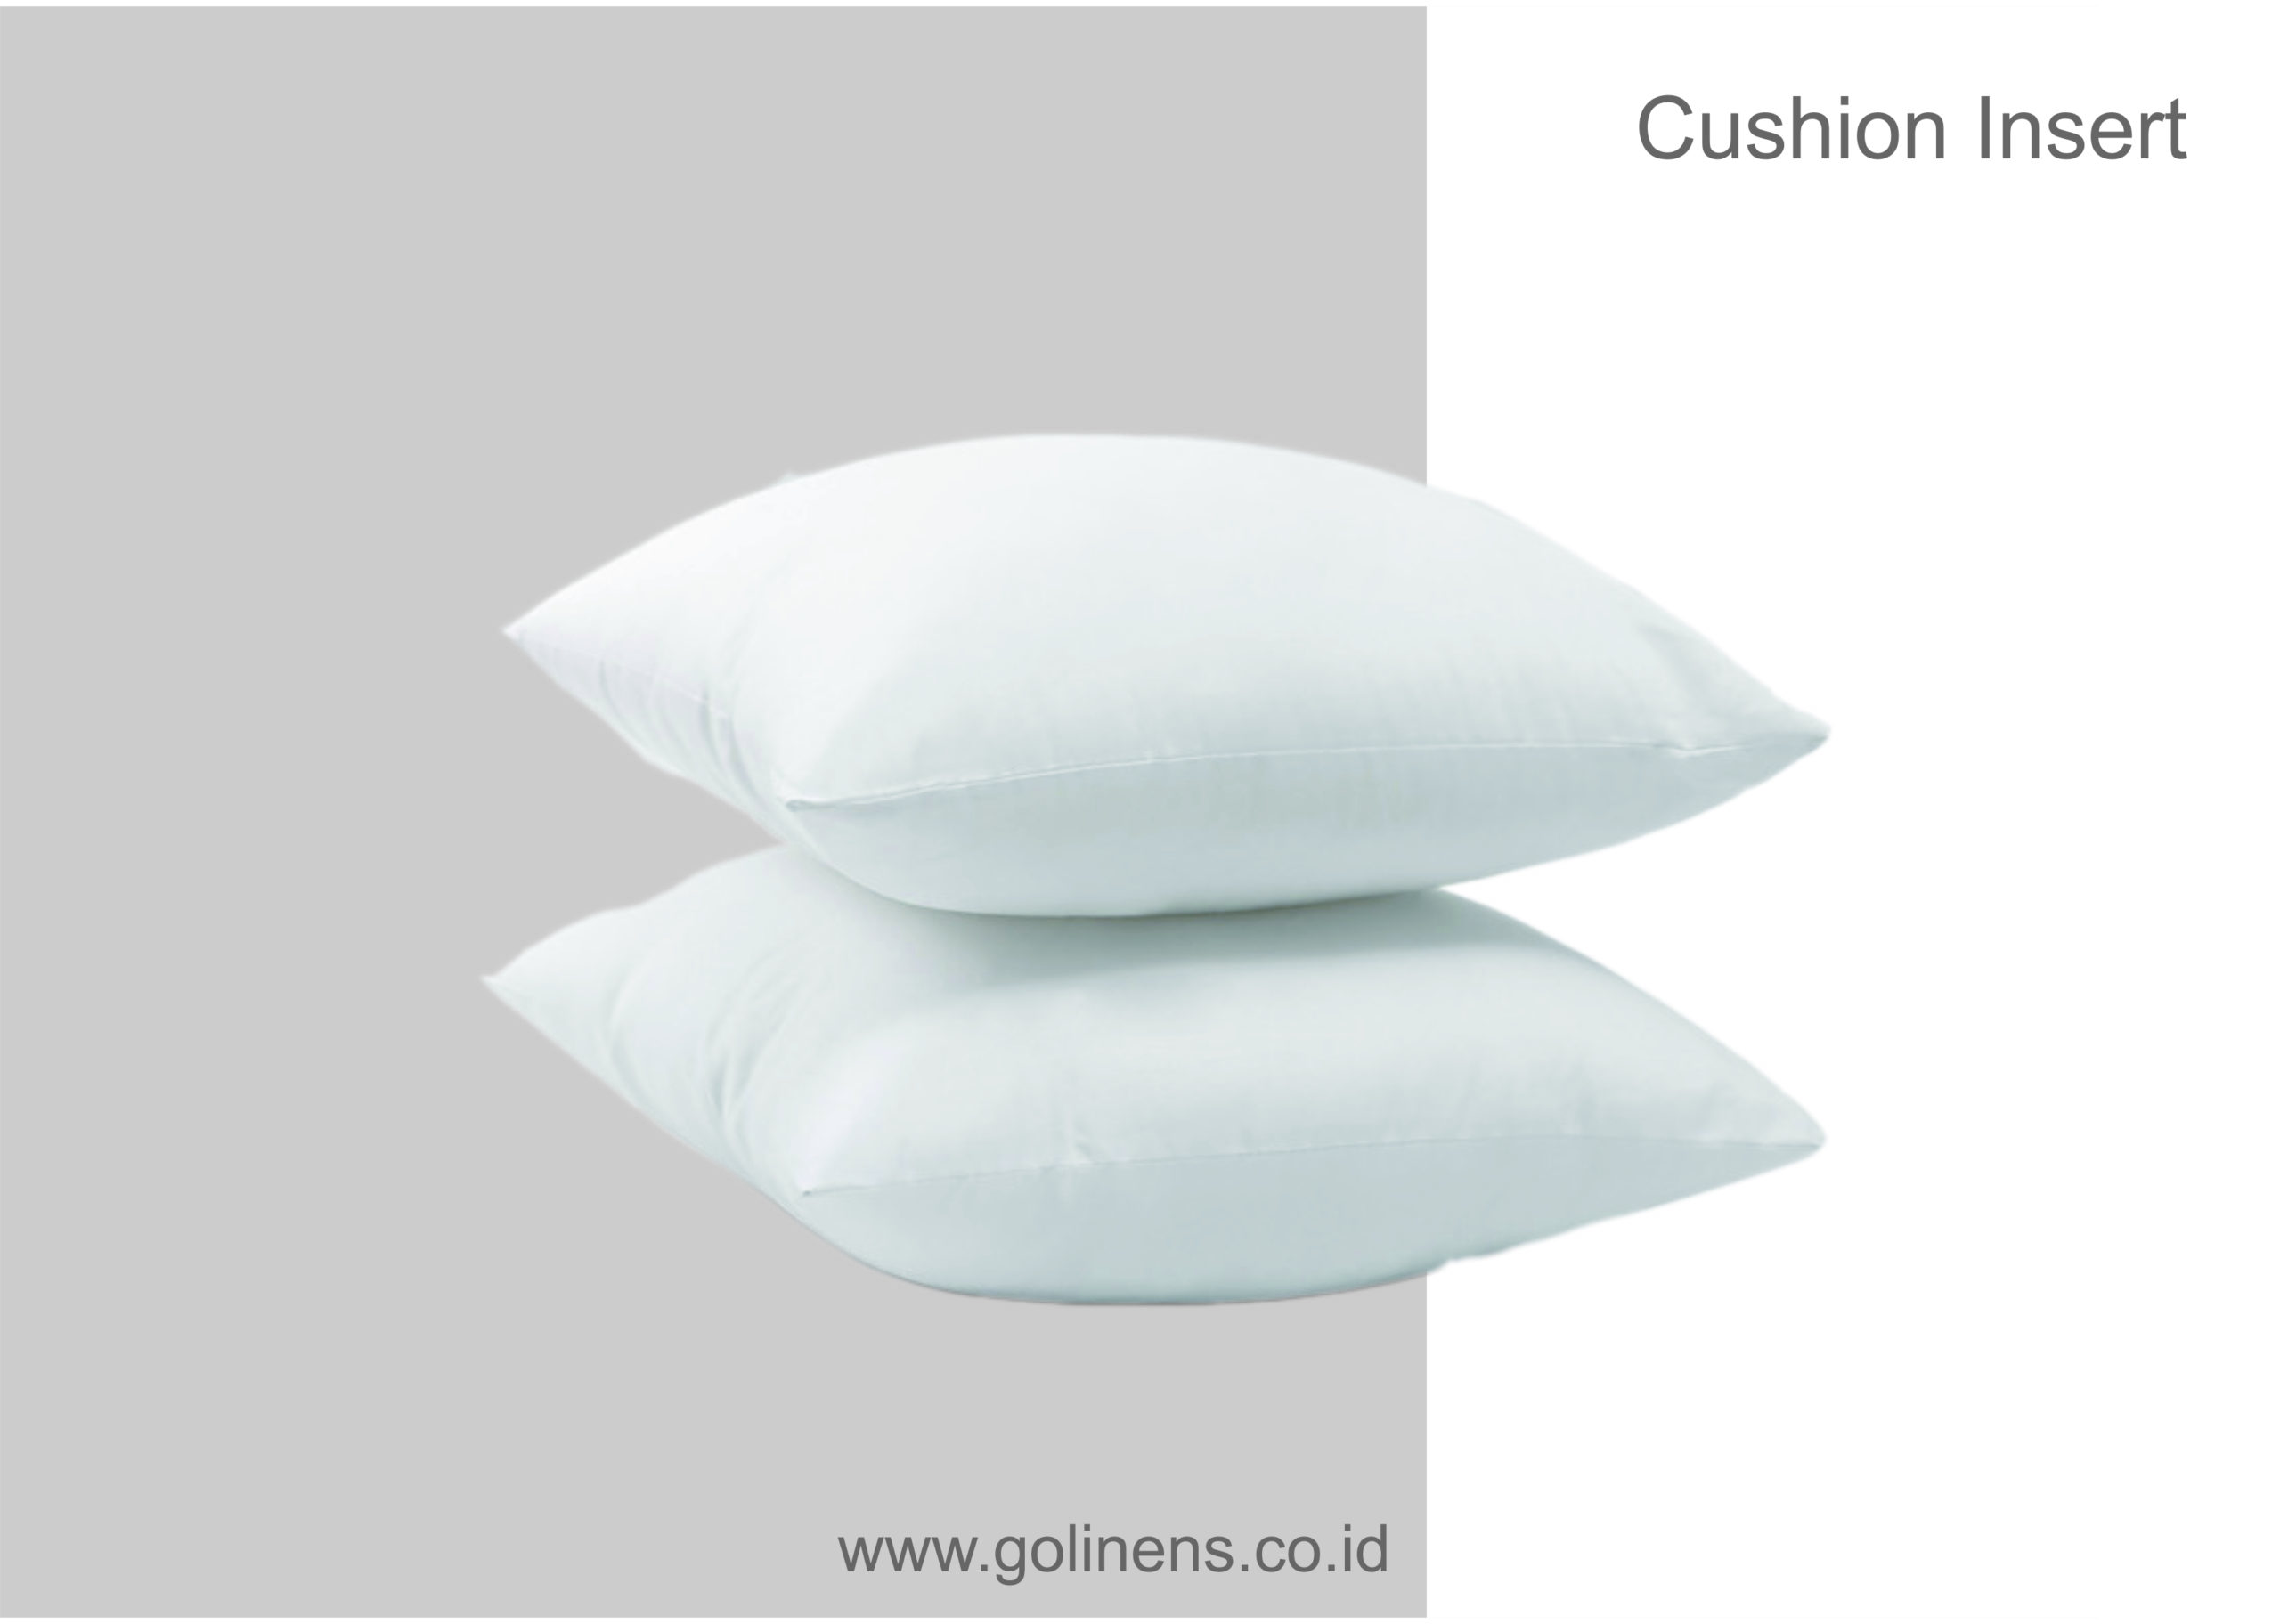 Premium Wholesale Cushion Inserts - Get The Ultimate Comfort For Your Hotel